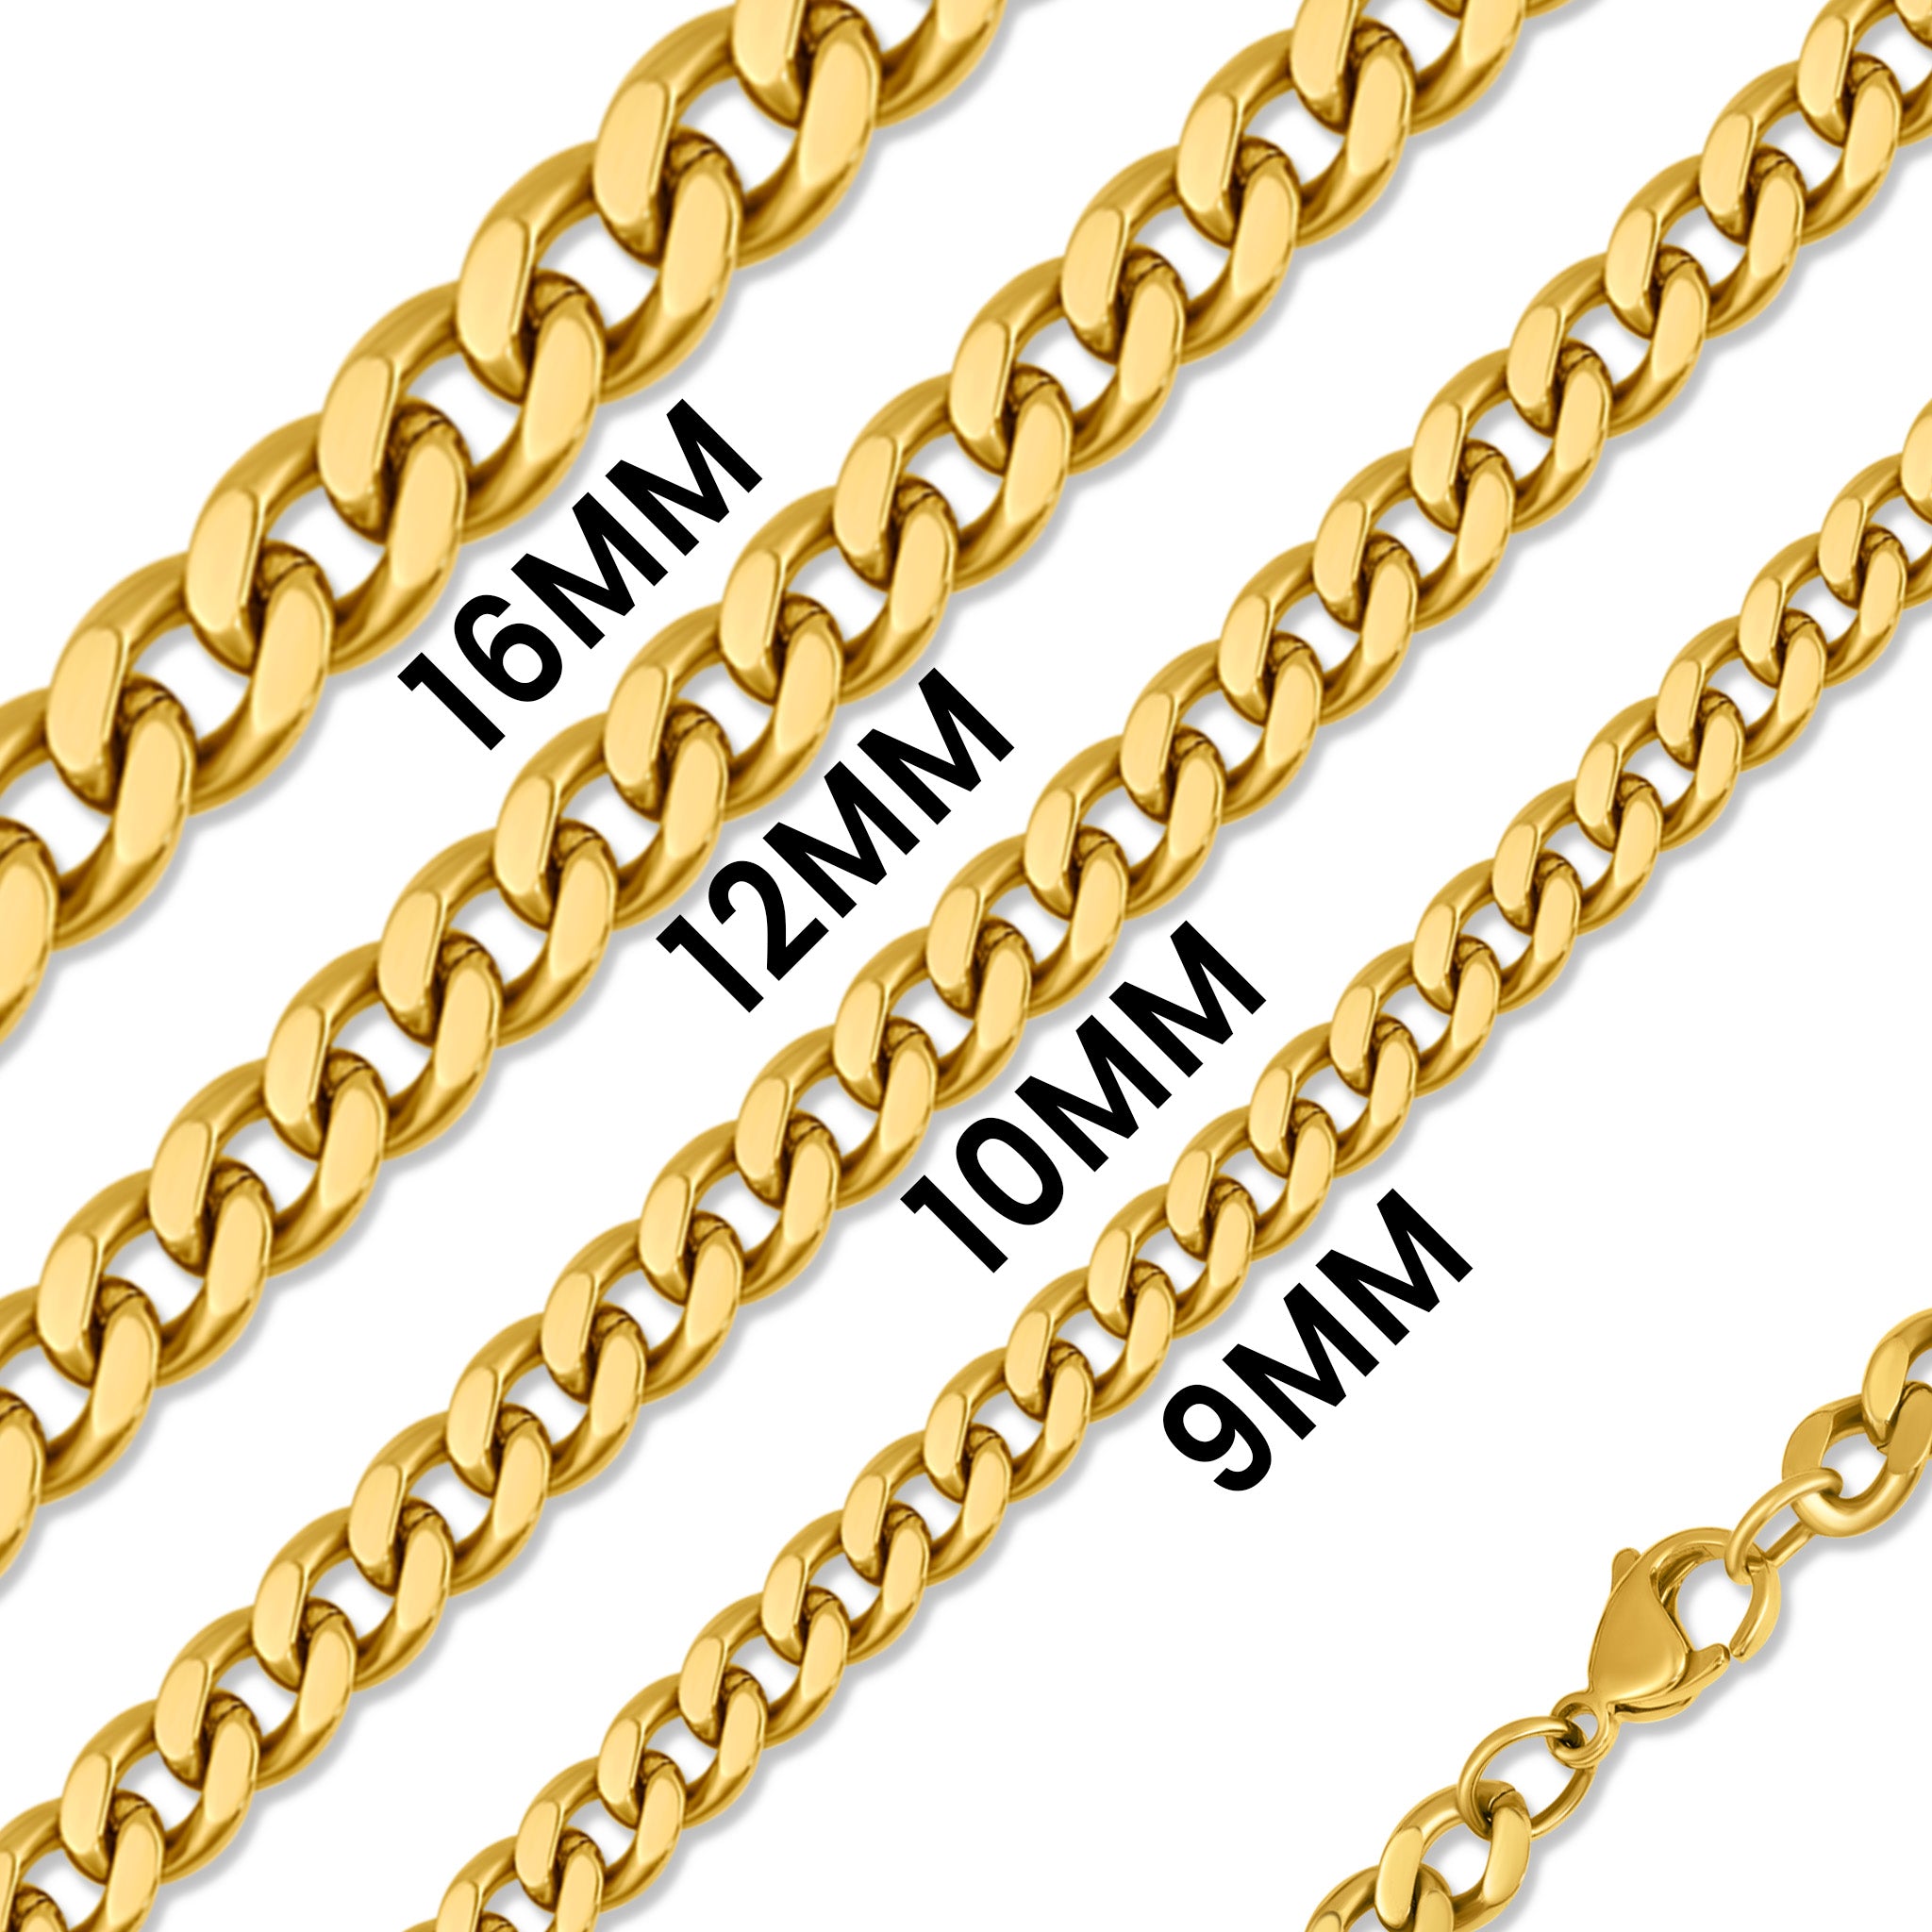 Necklaces Stainless Steel Curb Chain Necklace Chn7500 10mm / 24 Wholesale Jewelry Website Unisex